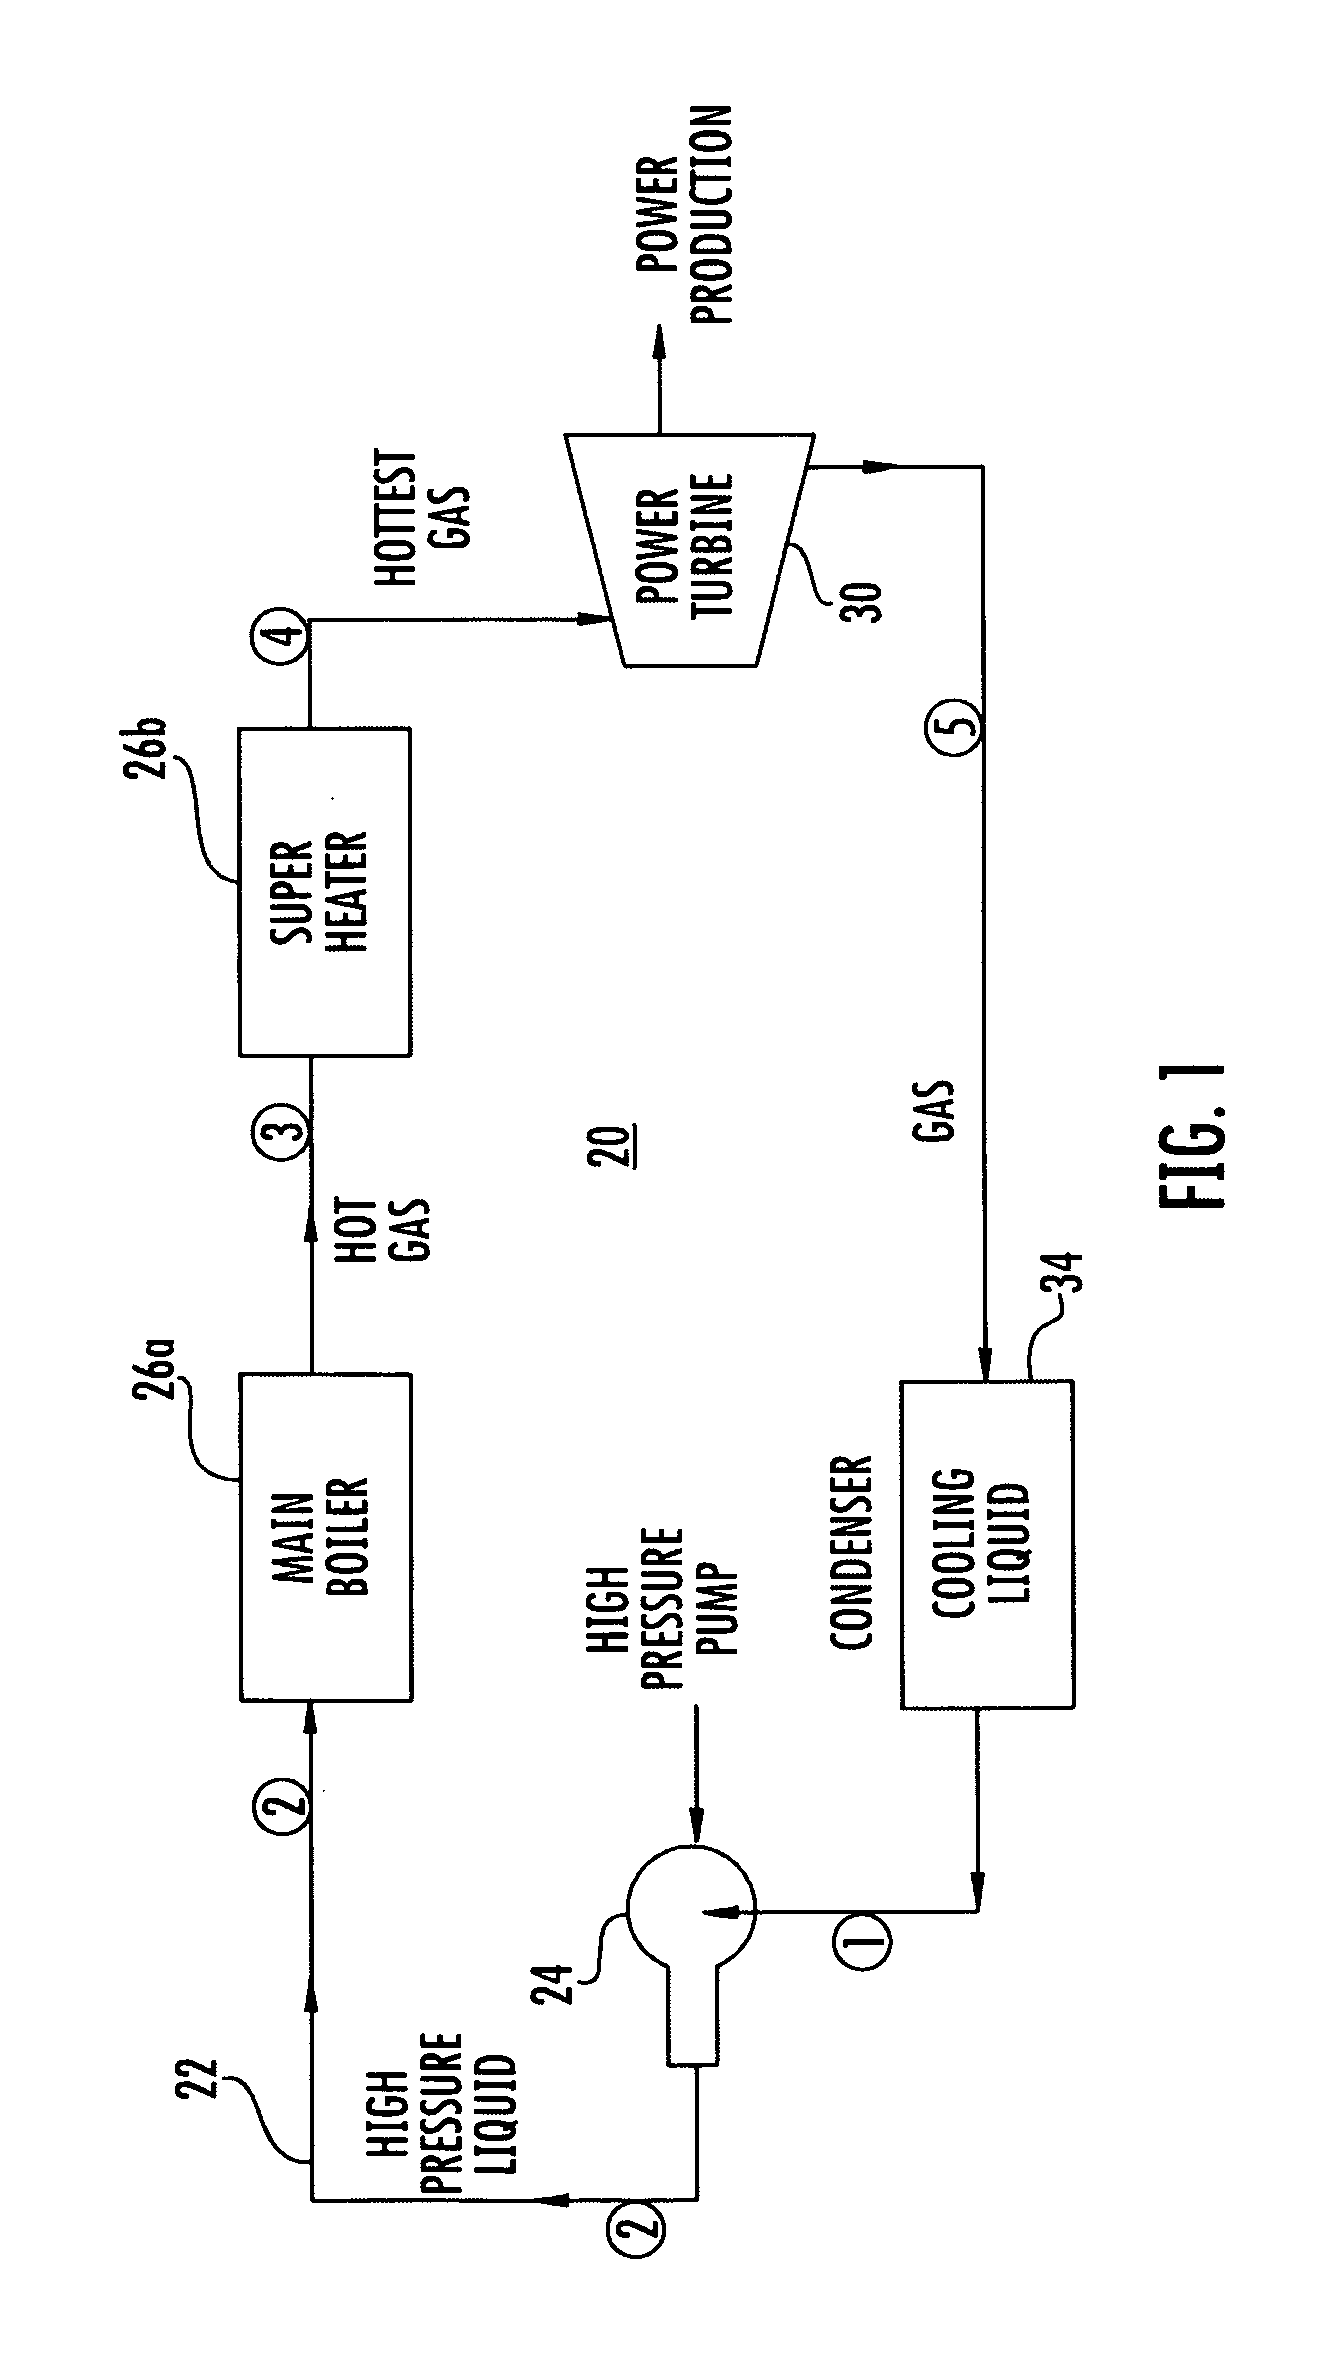 Ultra-high-efficiency engines and corresponding thermodynamic system